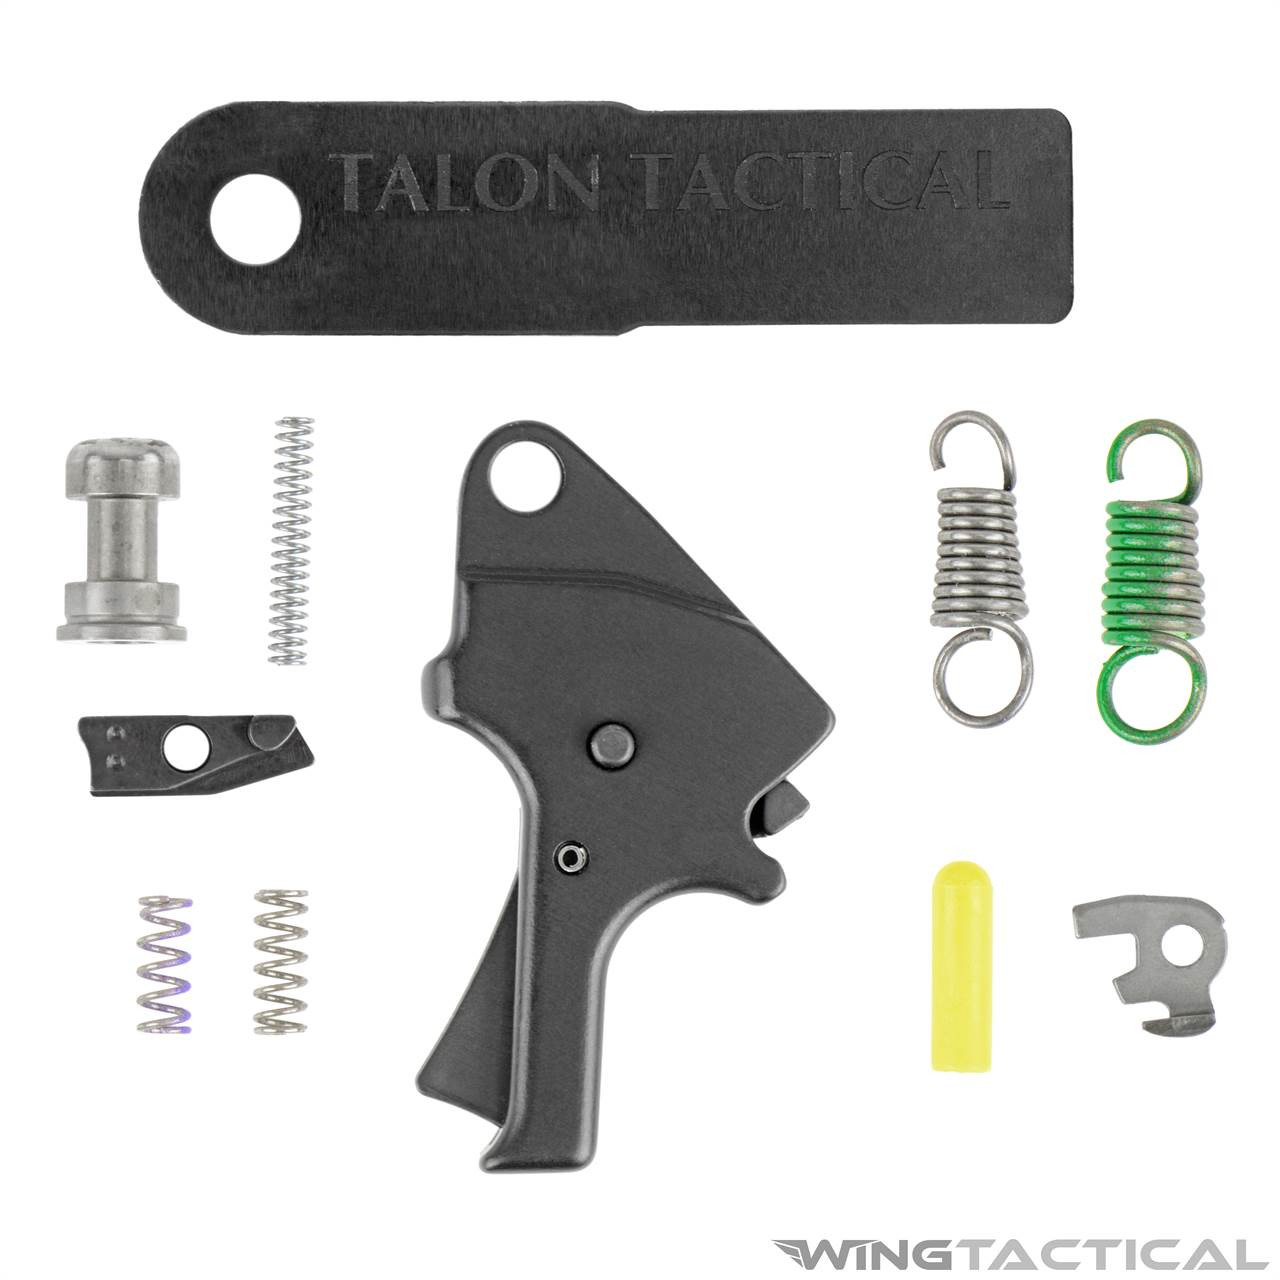 Apex Forward Set Flat Trigger Kit for Smith & Wesson M&P 2.0